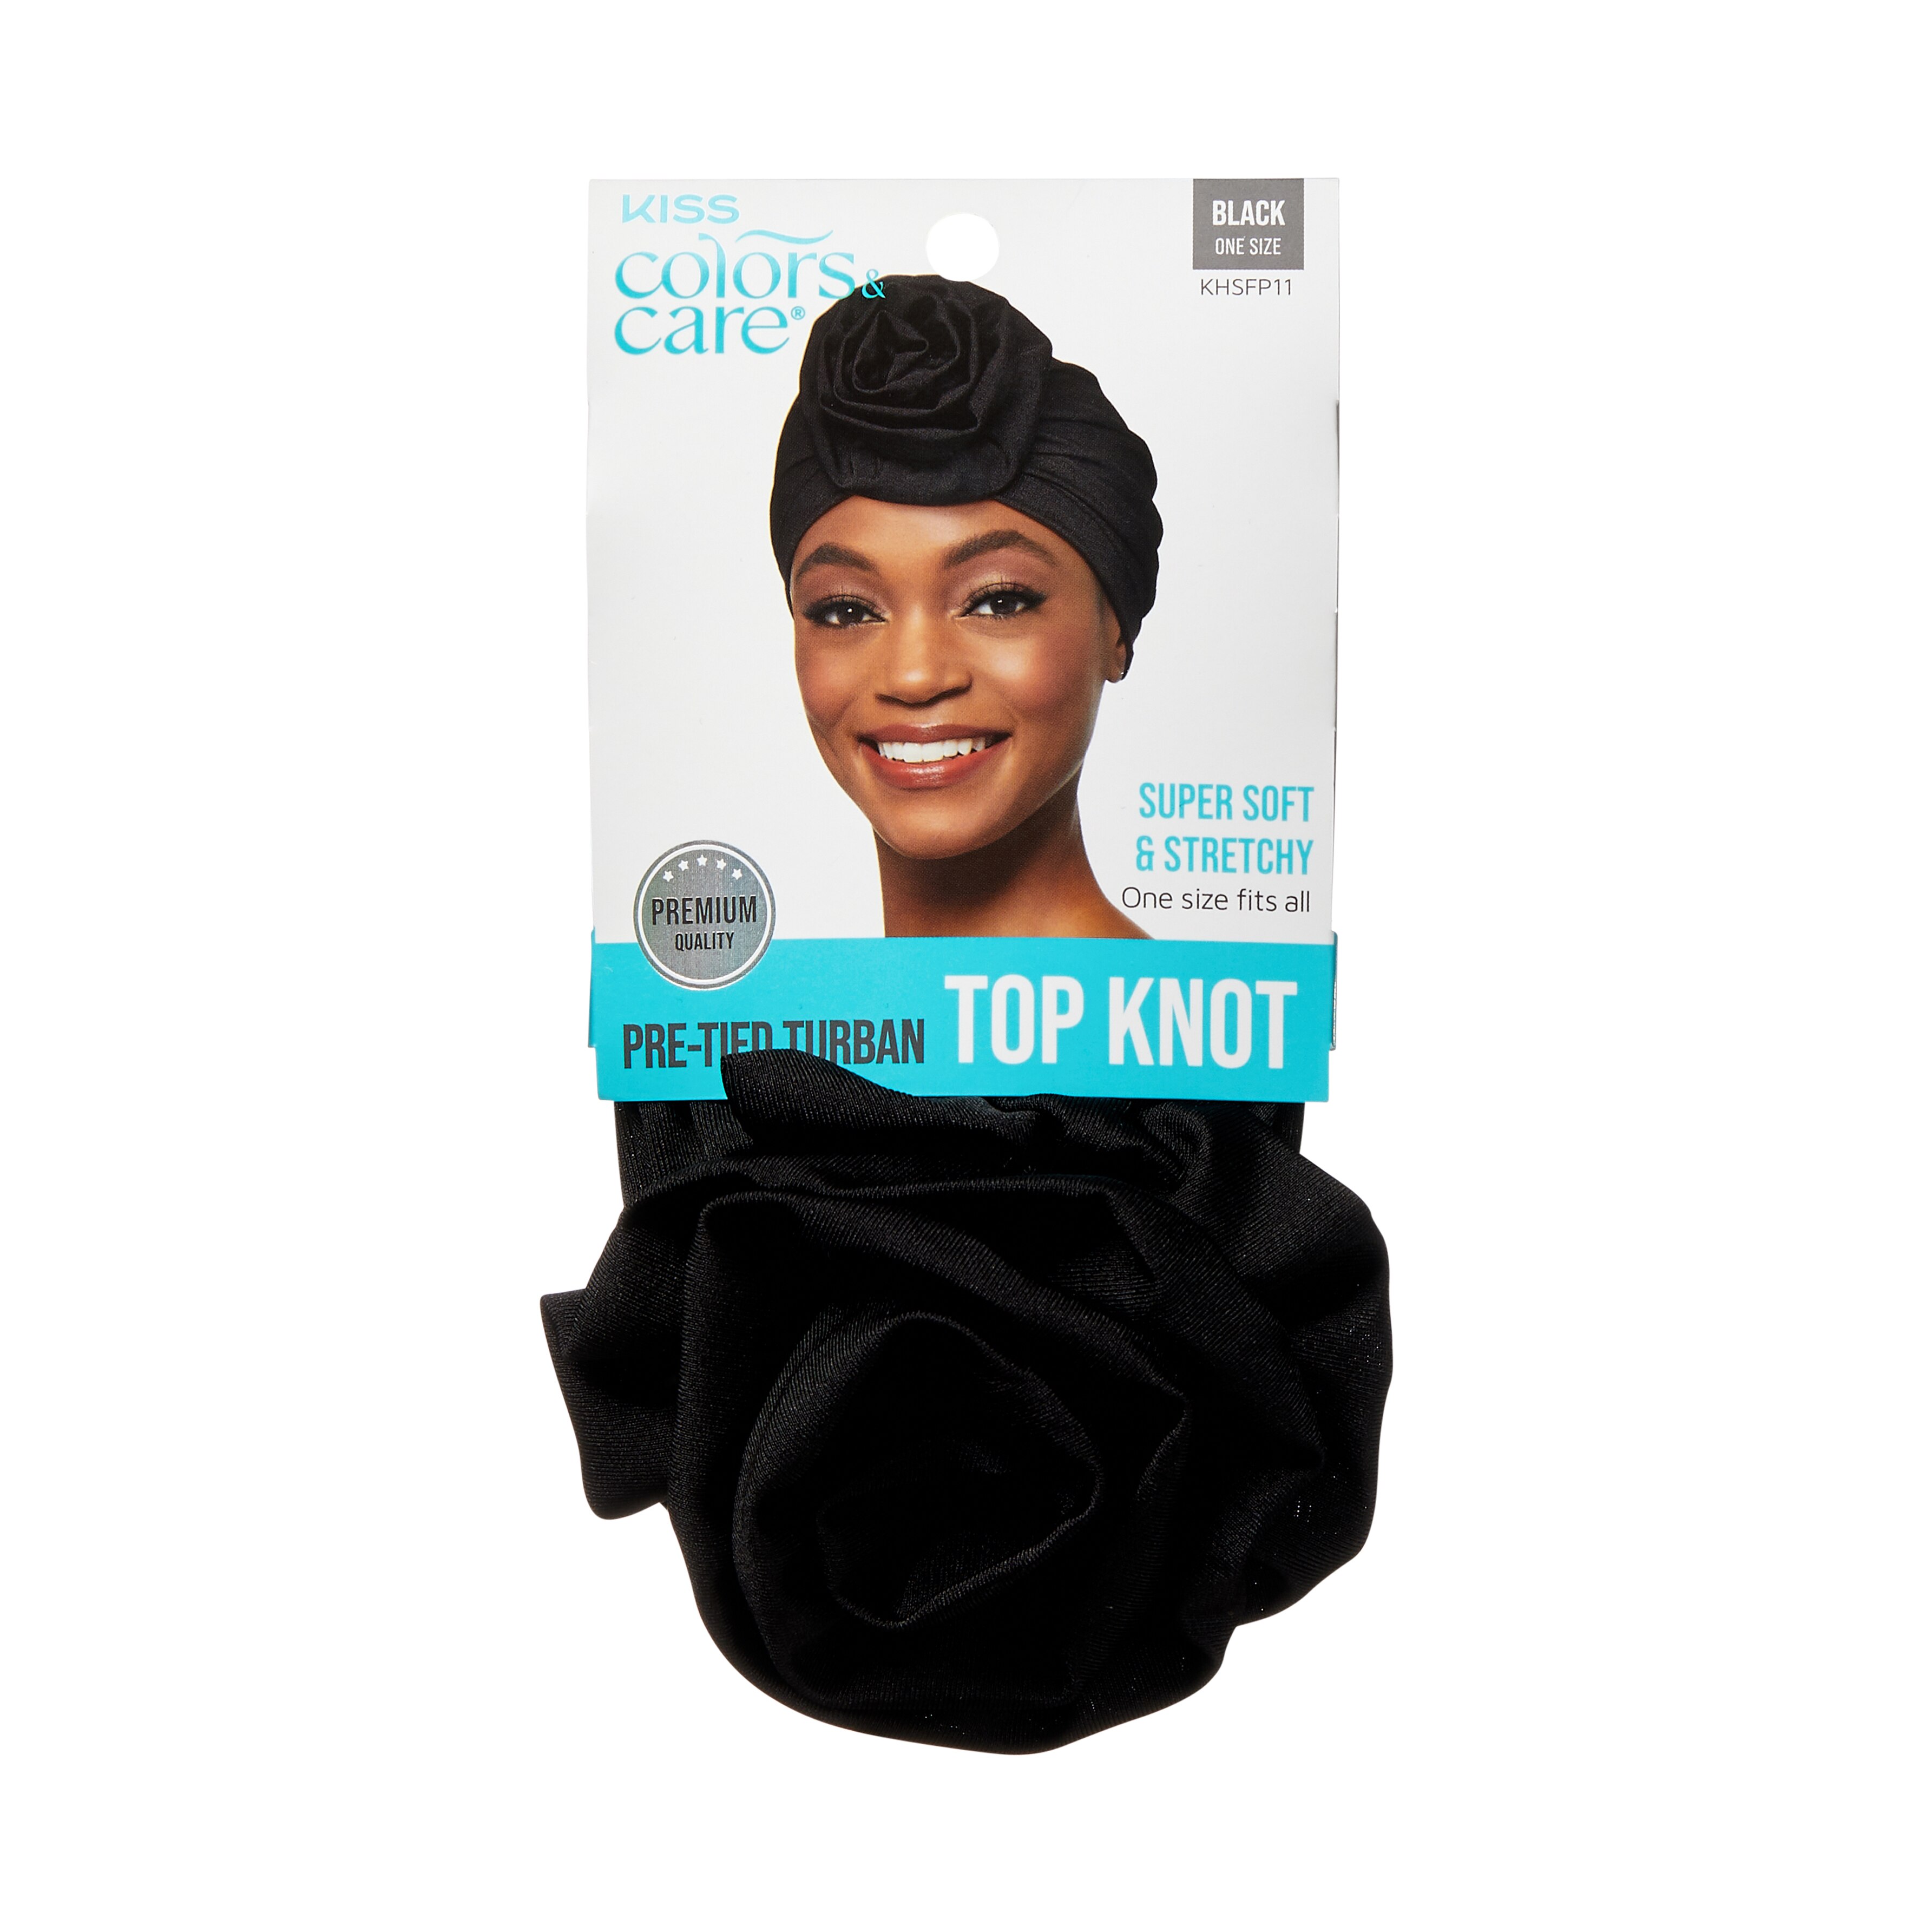 KISS Colors & Care Top Knot Pre Tied Turban, Black